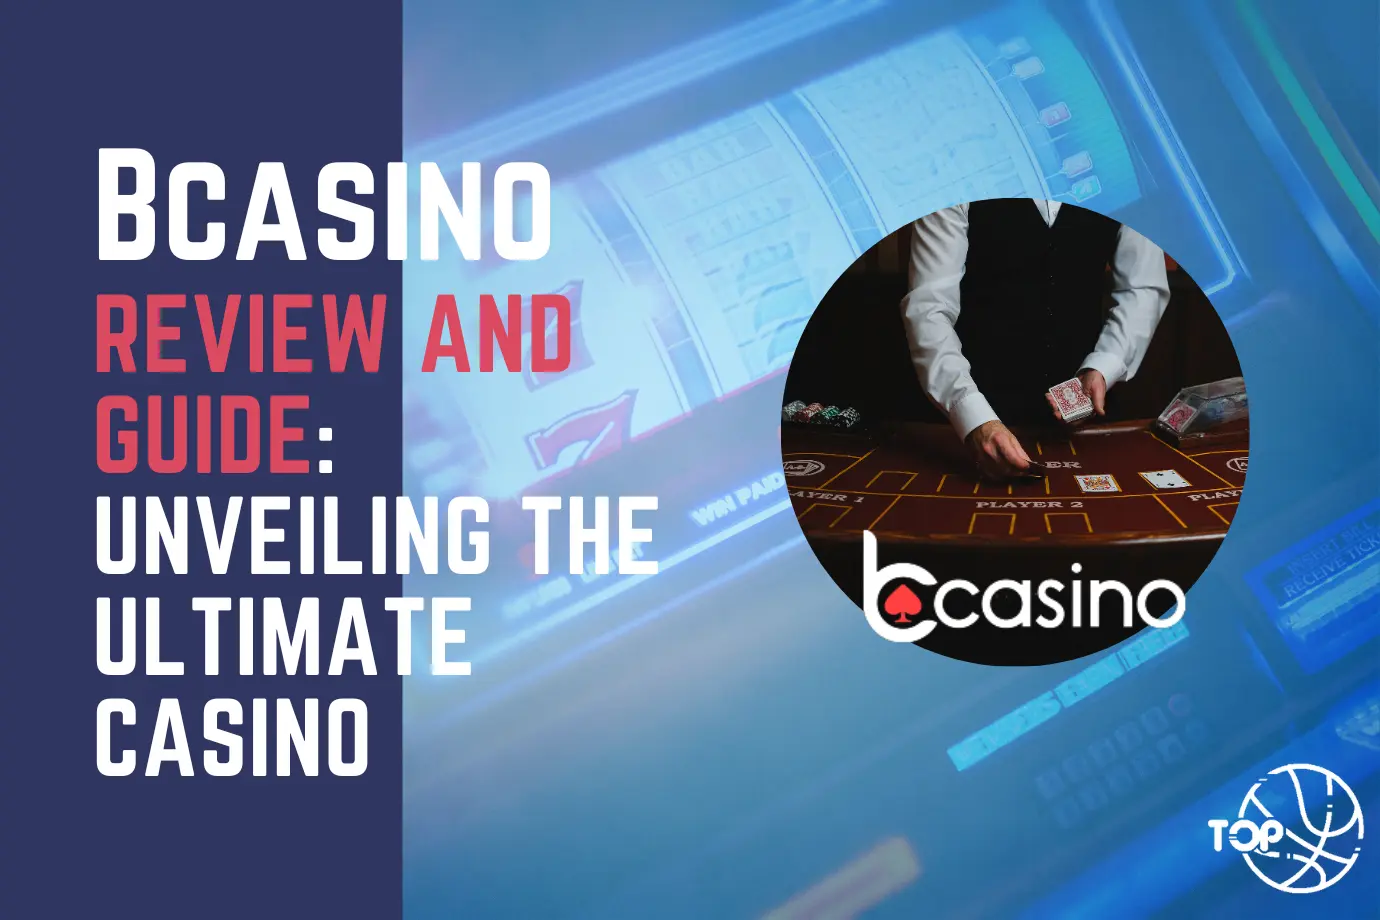 BCasino Review and Guide: Unveiling the Ultimate Casino